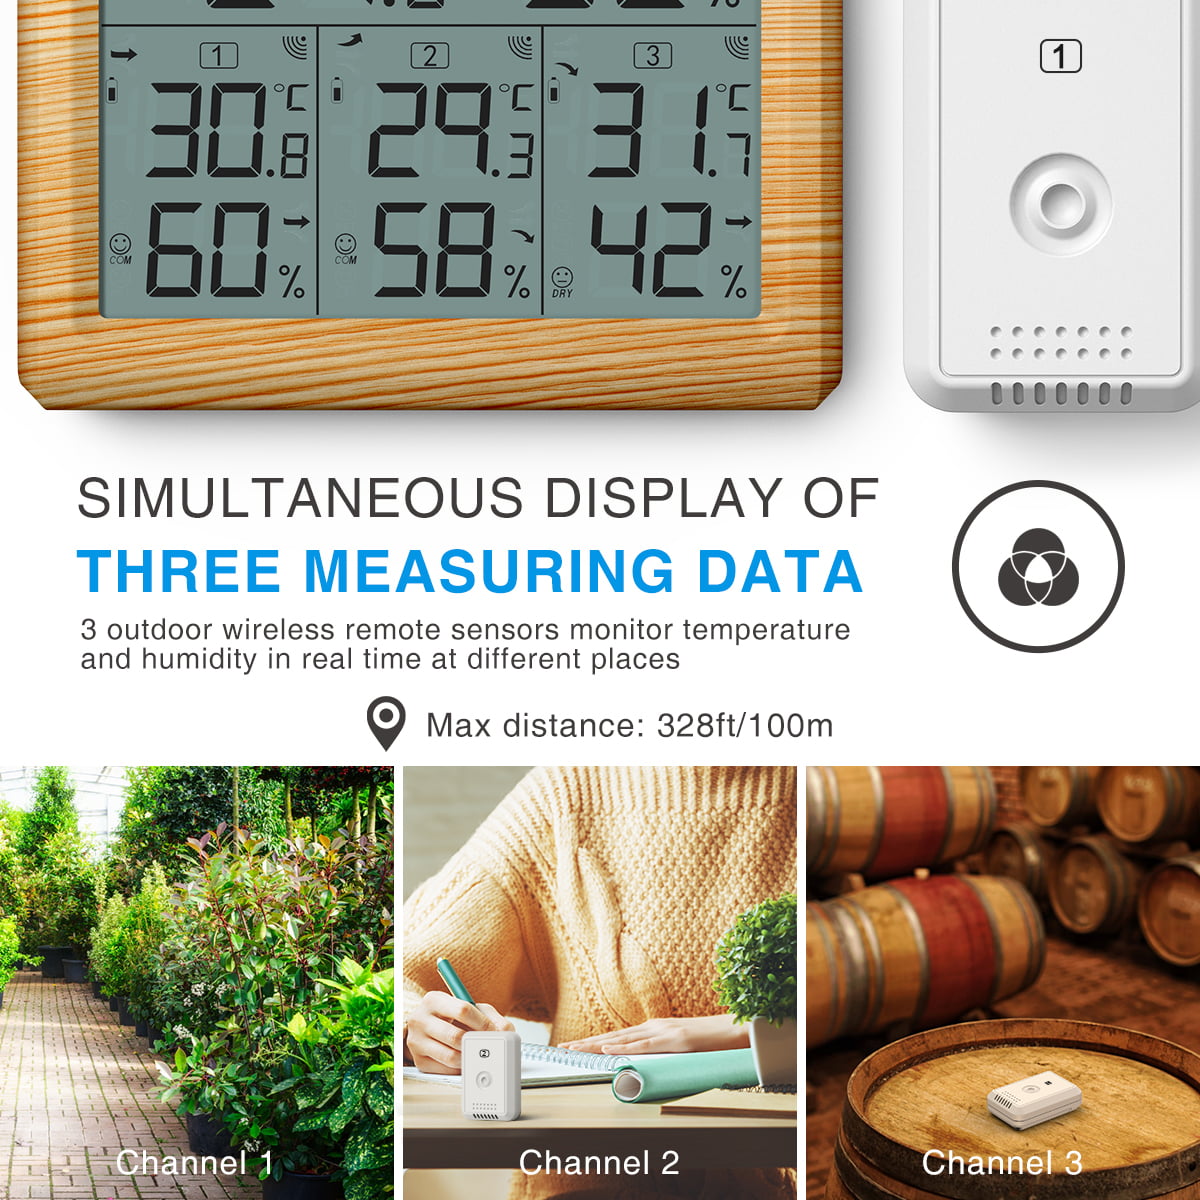 Outdoor Temperature Thermometer Wireless  Wireless Outdoor Thermometer  Sensor - Household Thermometers - Aliexpress